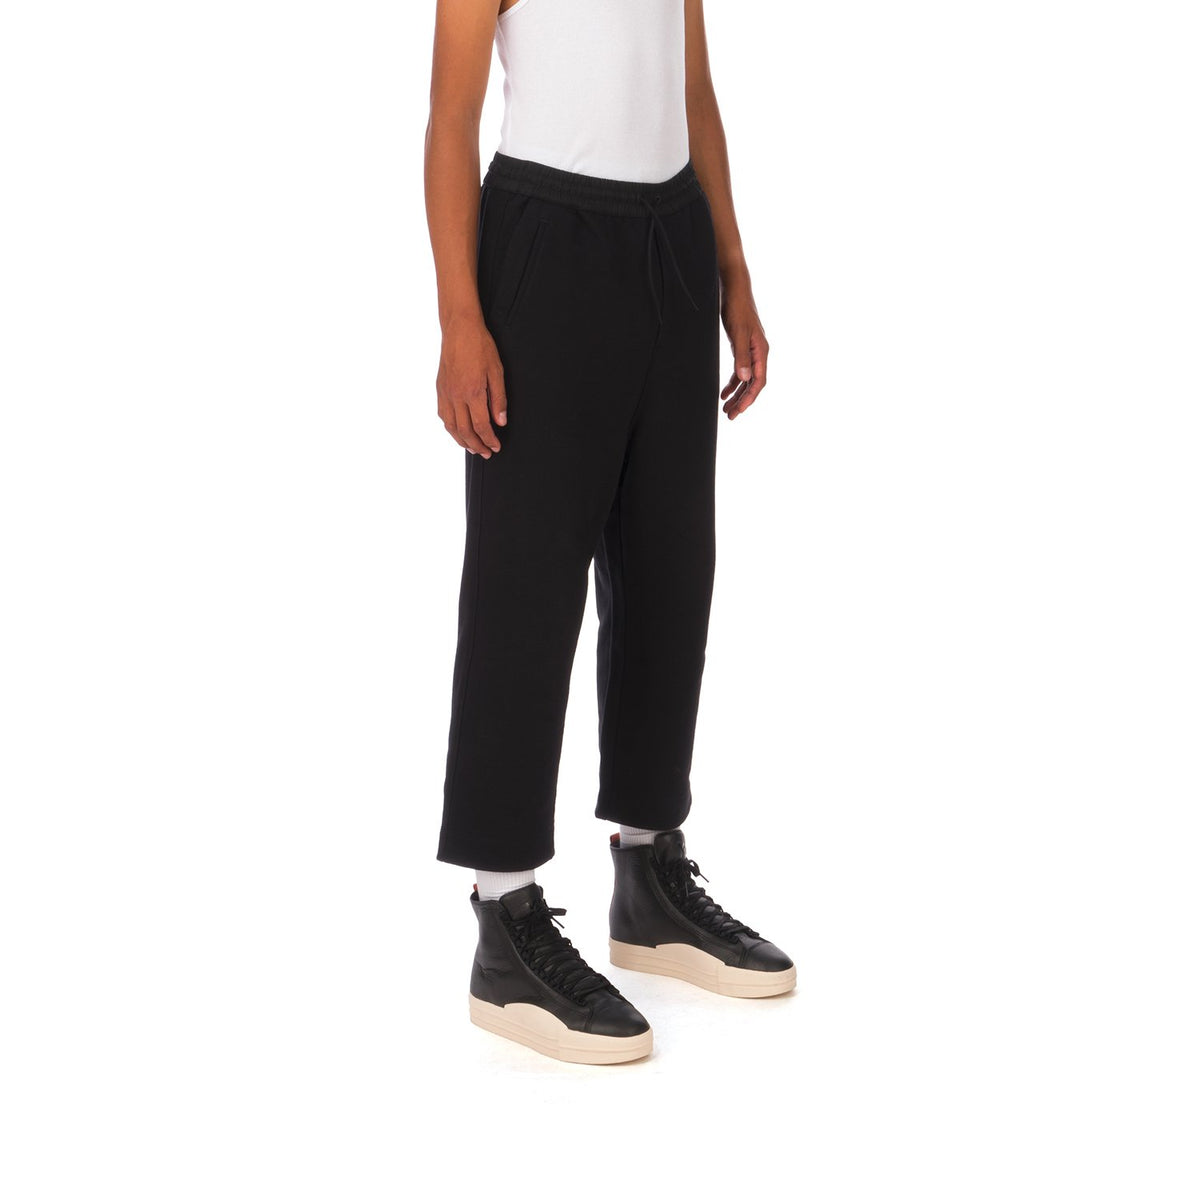 adidas Y-3 | M Classic Terry Cropped Pant Black - FN3392 - Concrete